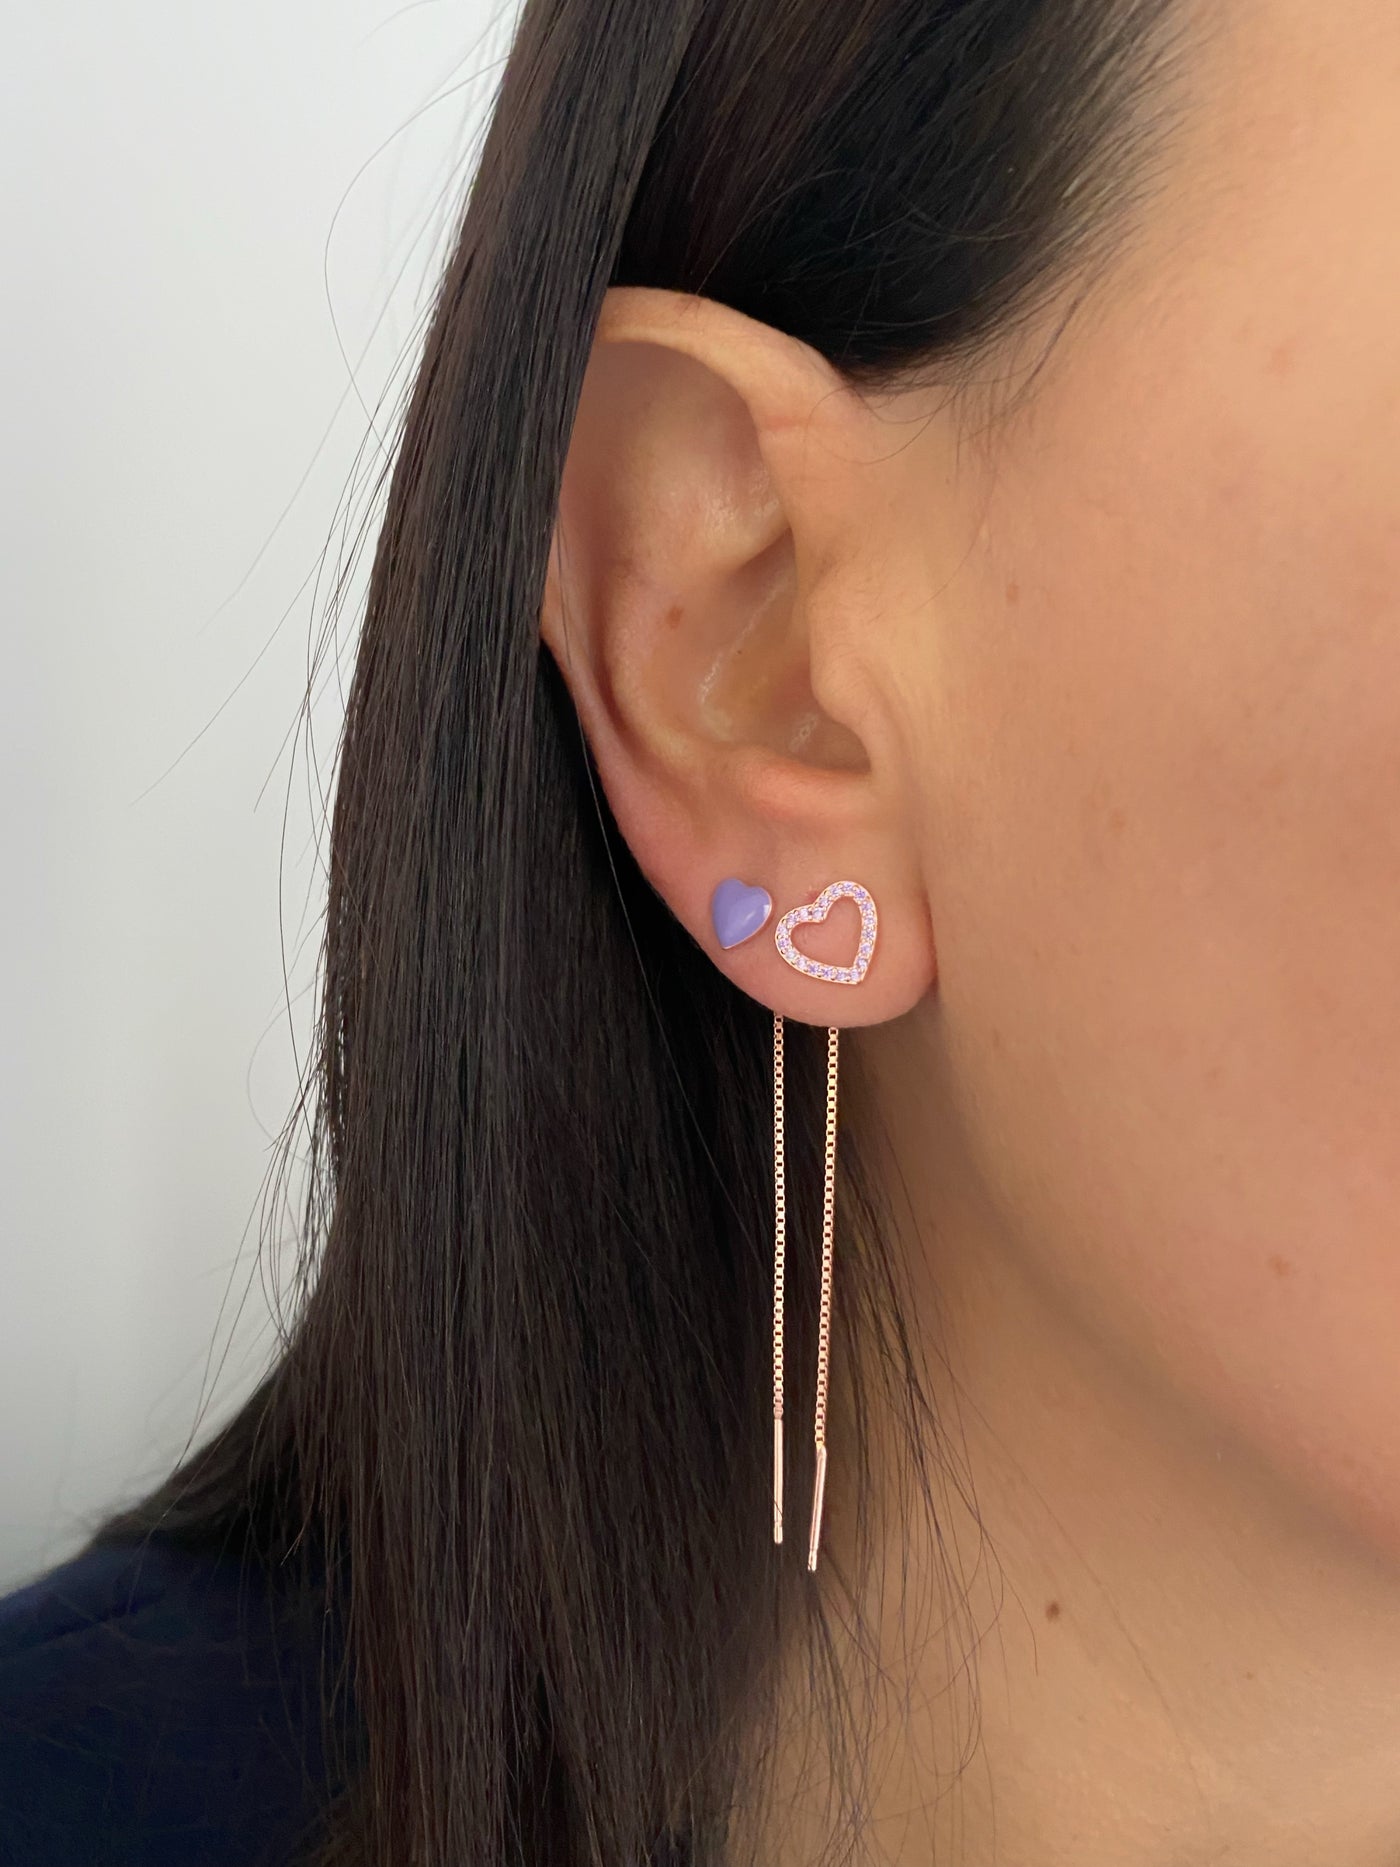 ROSE EARRINGS WITH HEARTS CHARMS